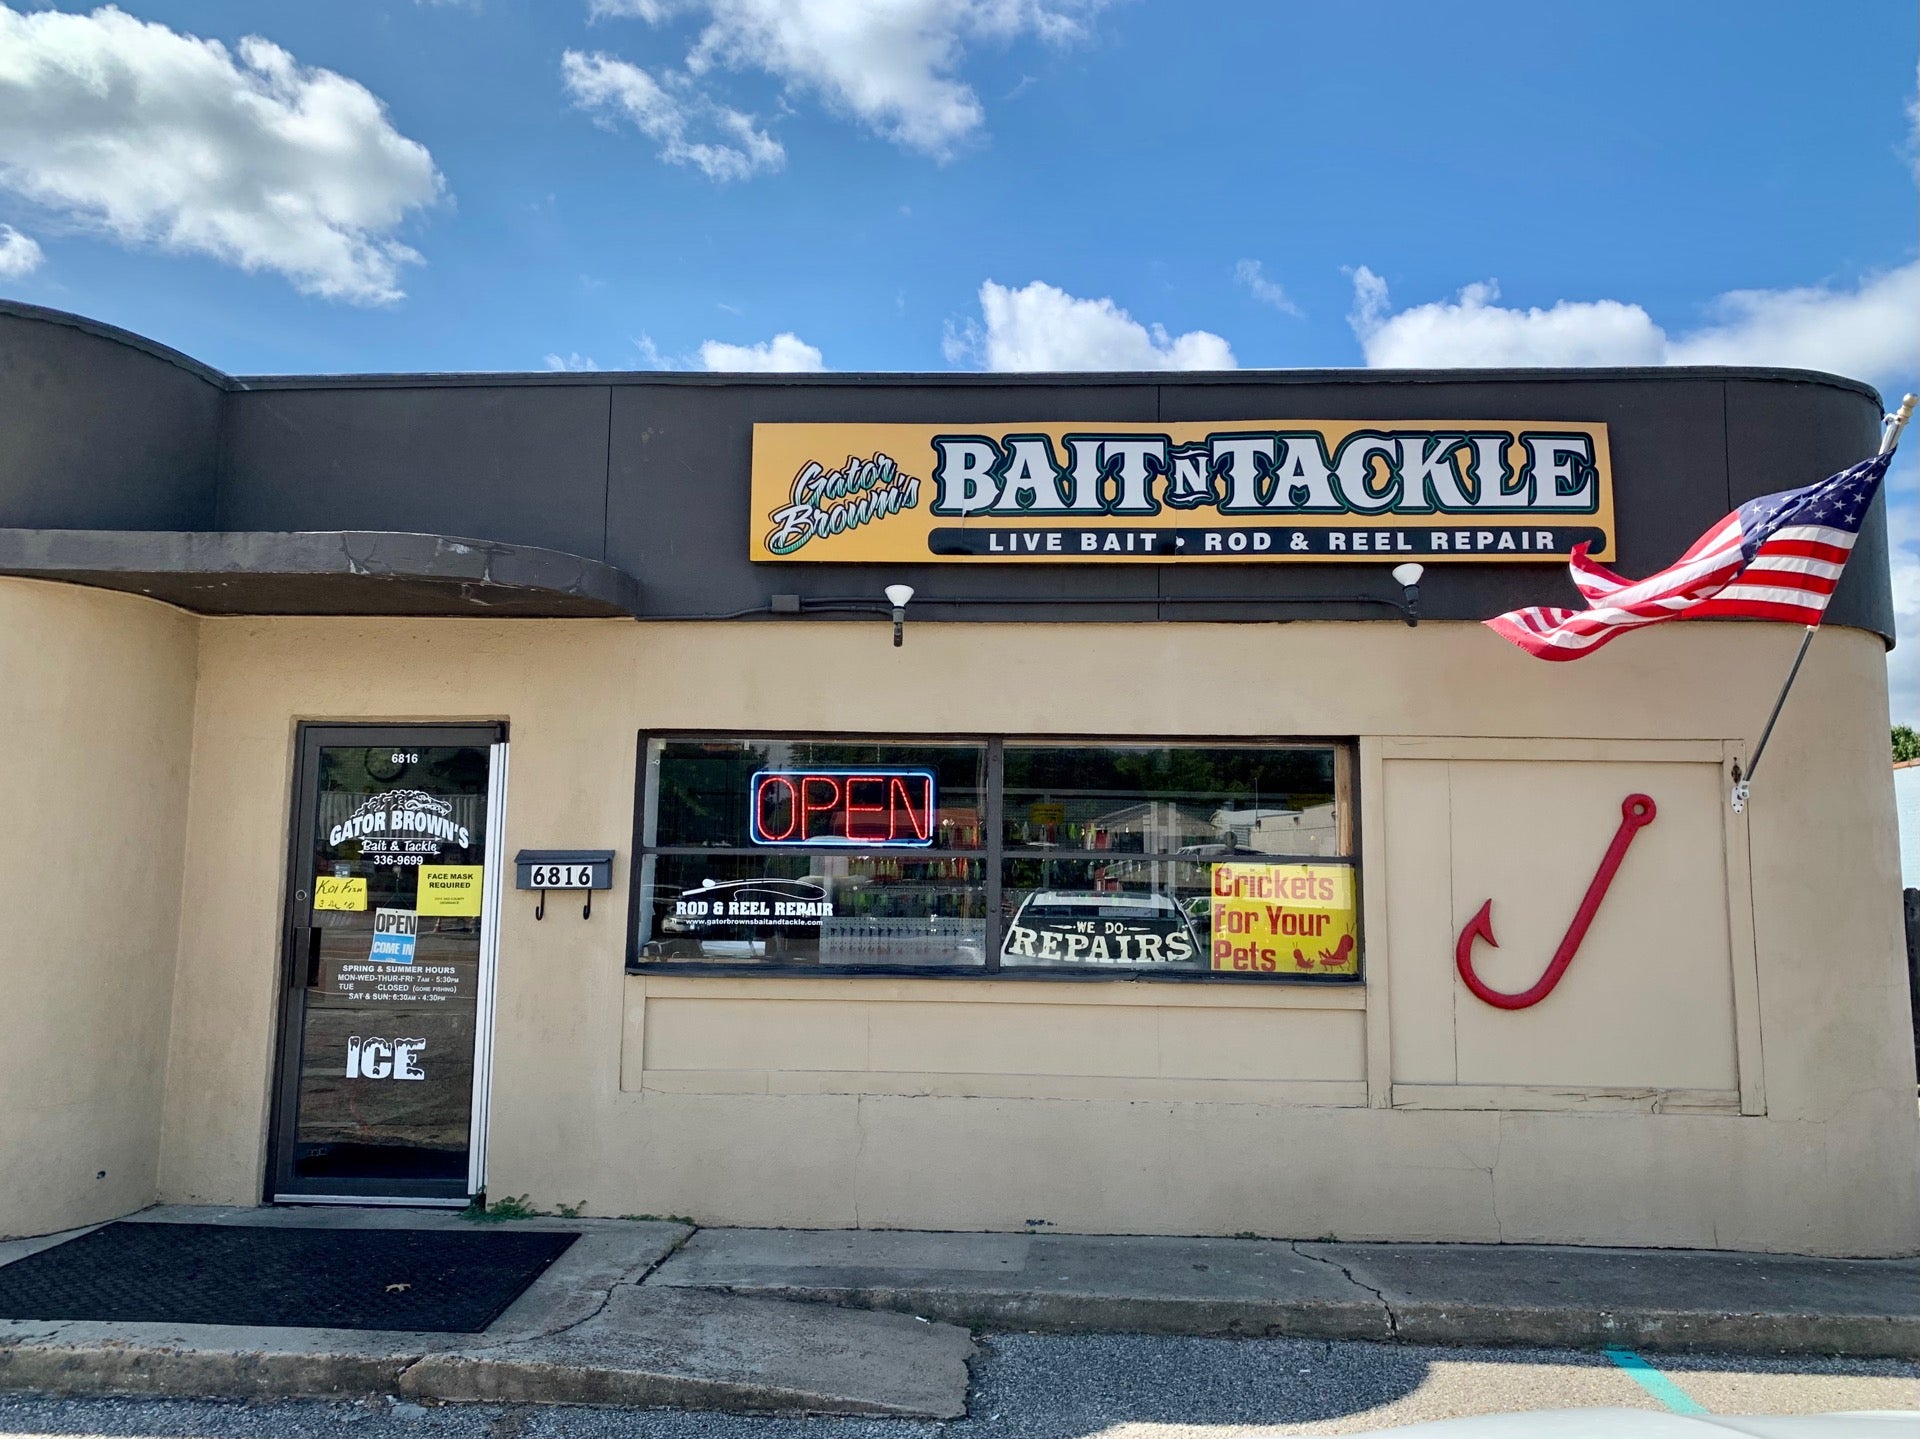 Gator Brown's Bait & Tackle Shop, 6816 Summer Ave, Memphis, TN - MapQuest